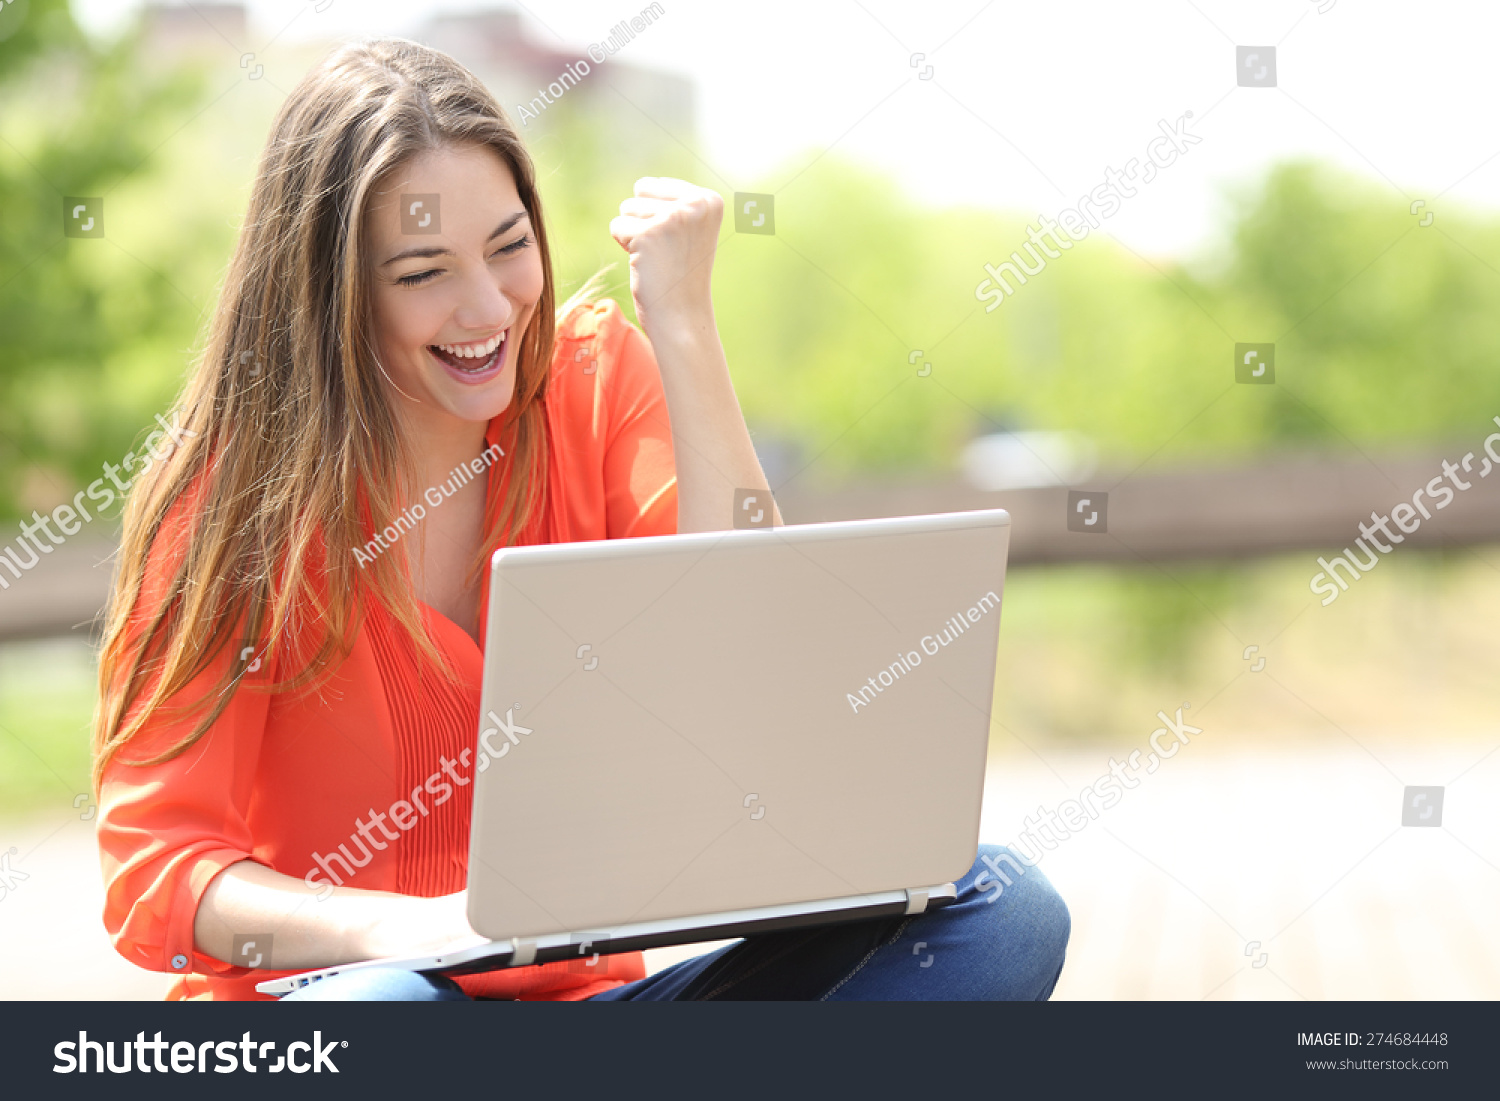 Euphoric woman searching job with a laptop in an urban park in summer #274684448